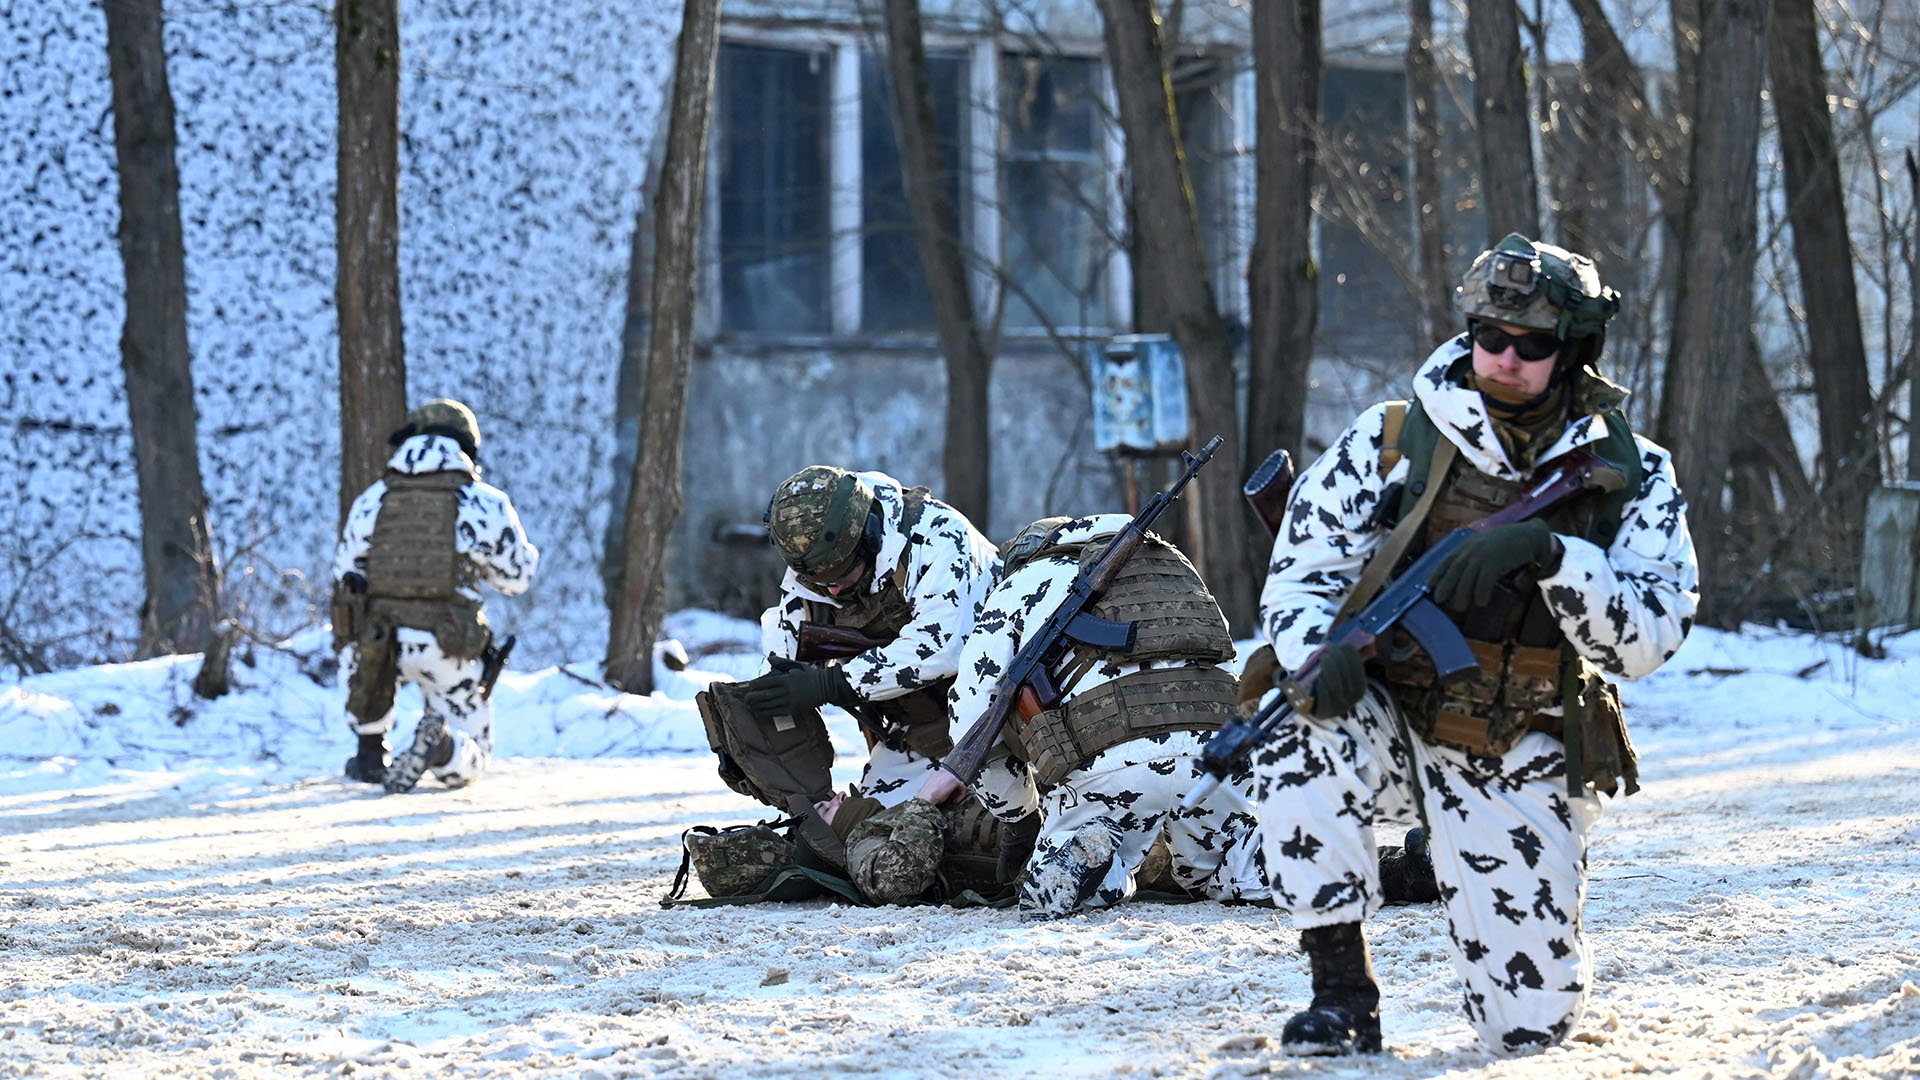 Ukrainian troops use Chernobyl exclusion zone for training exercise